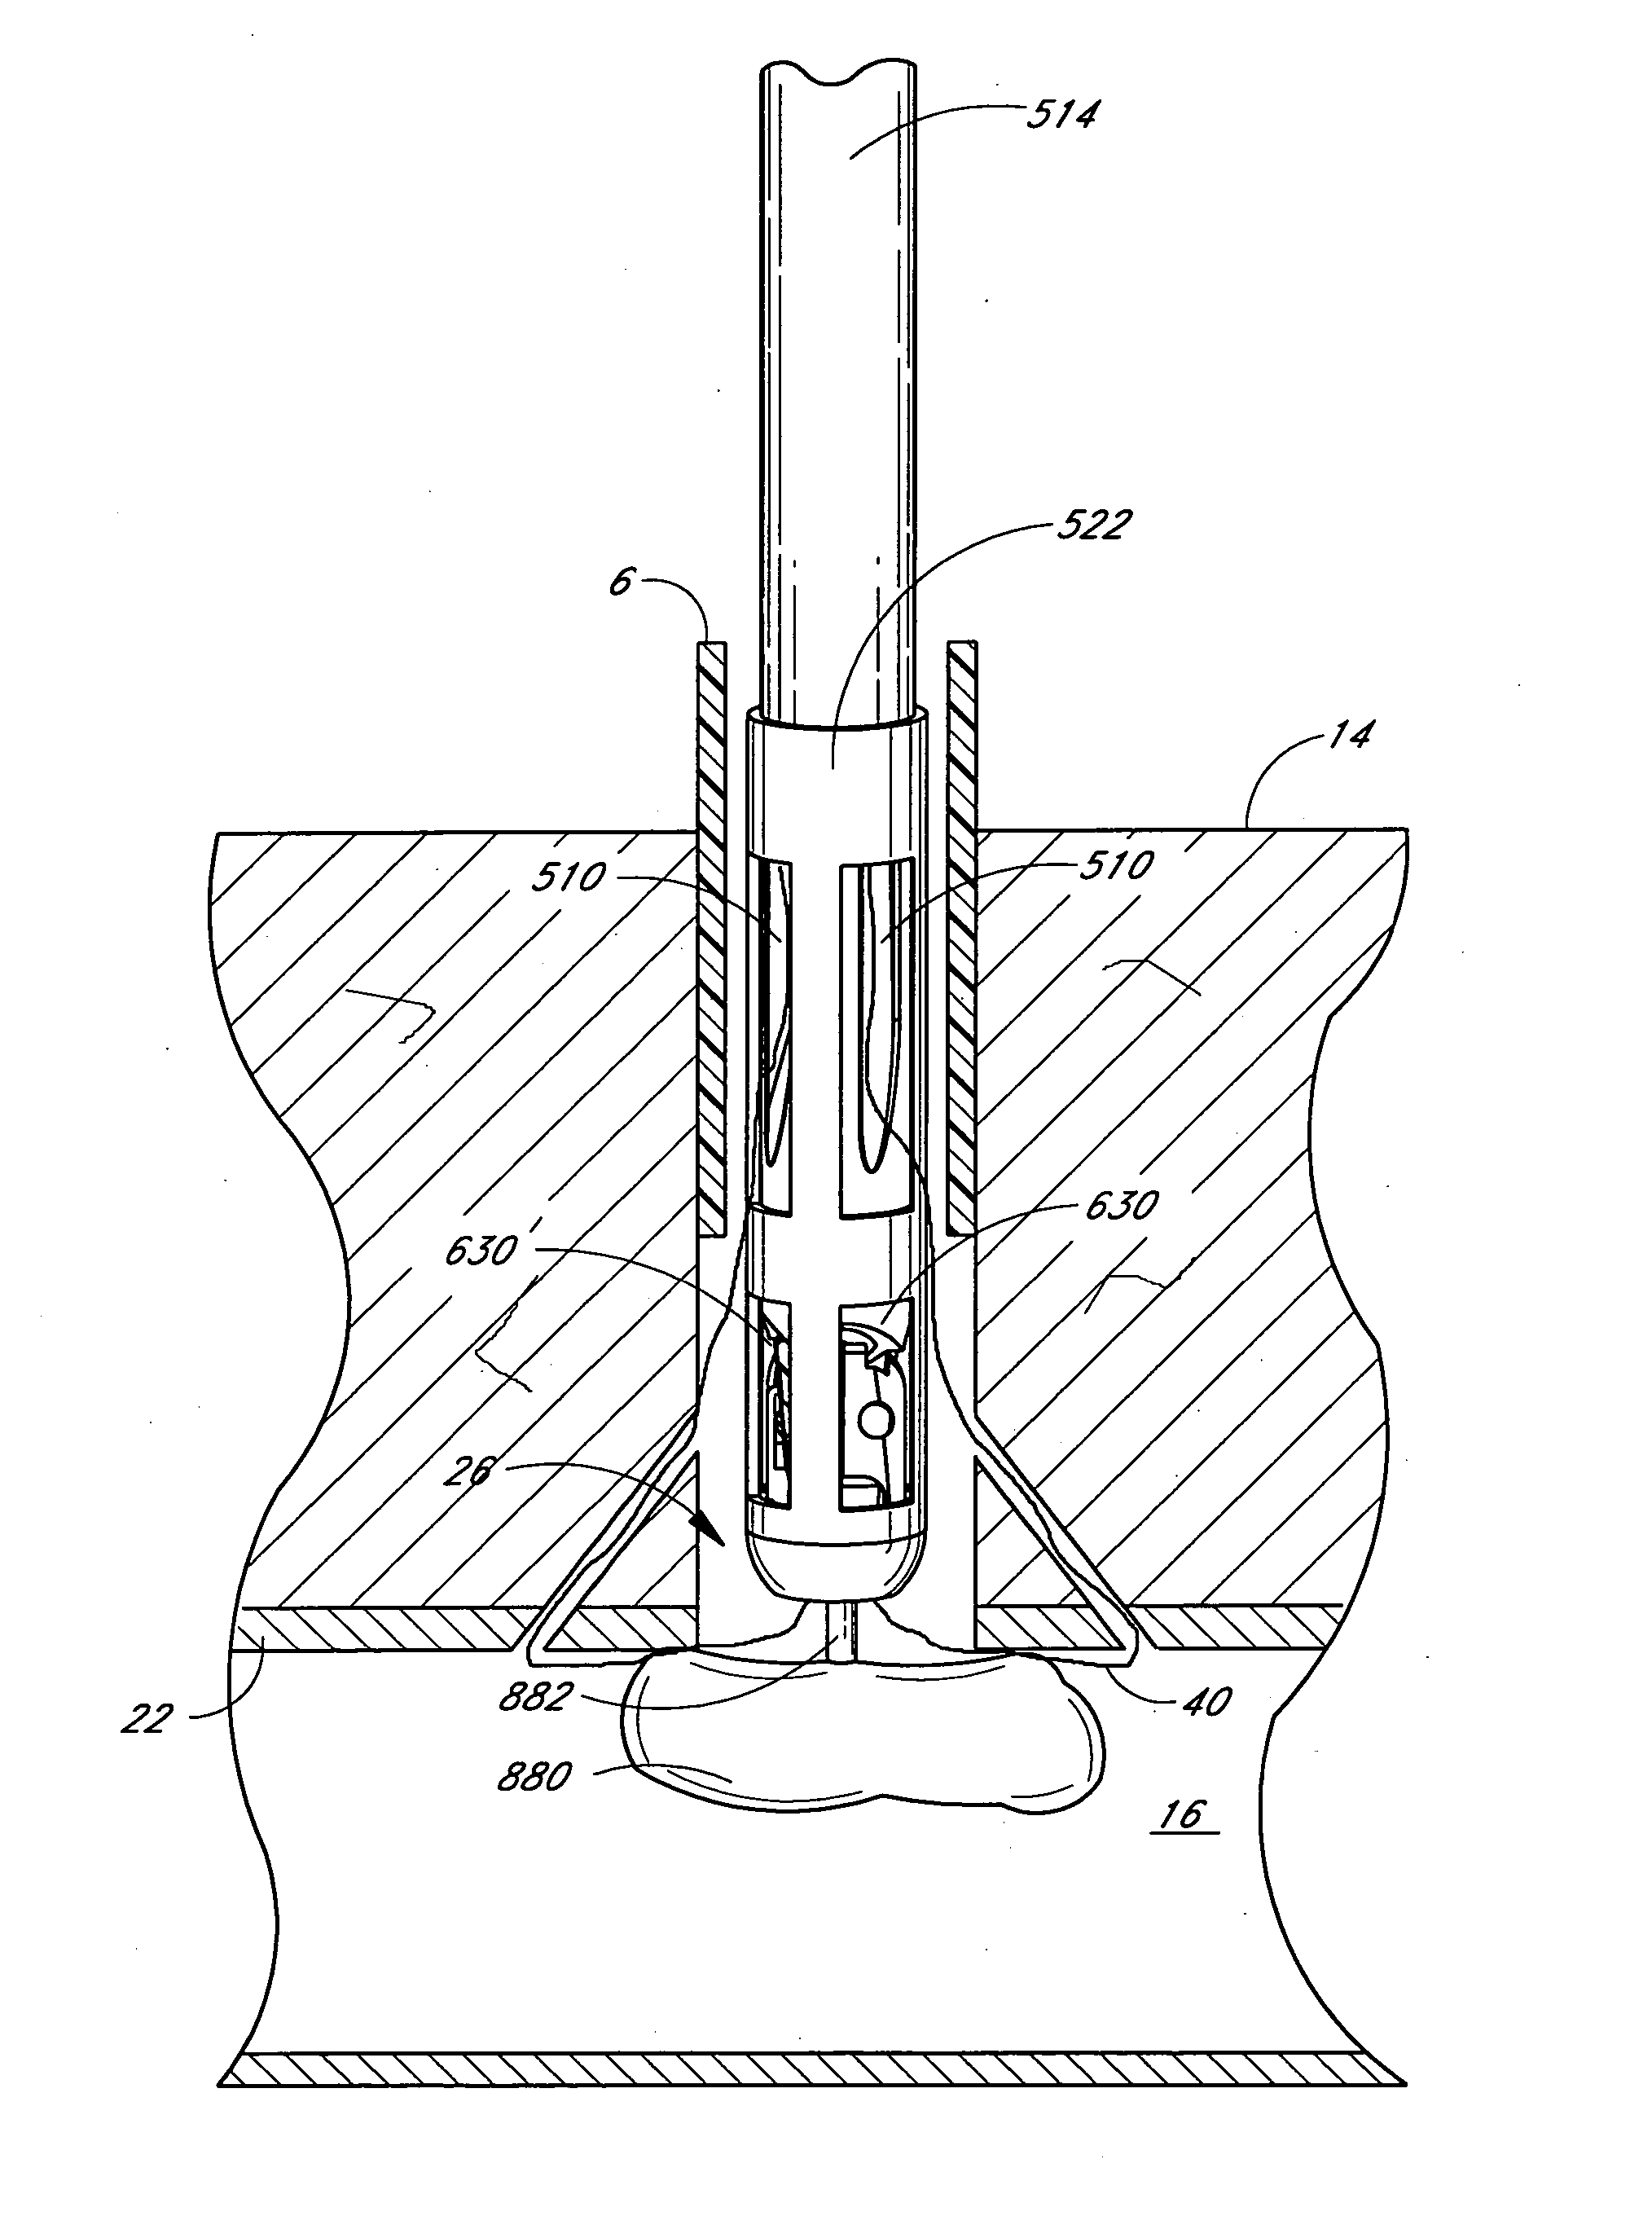 Suturing device and method